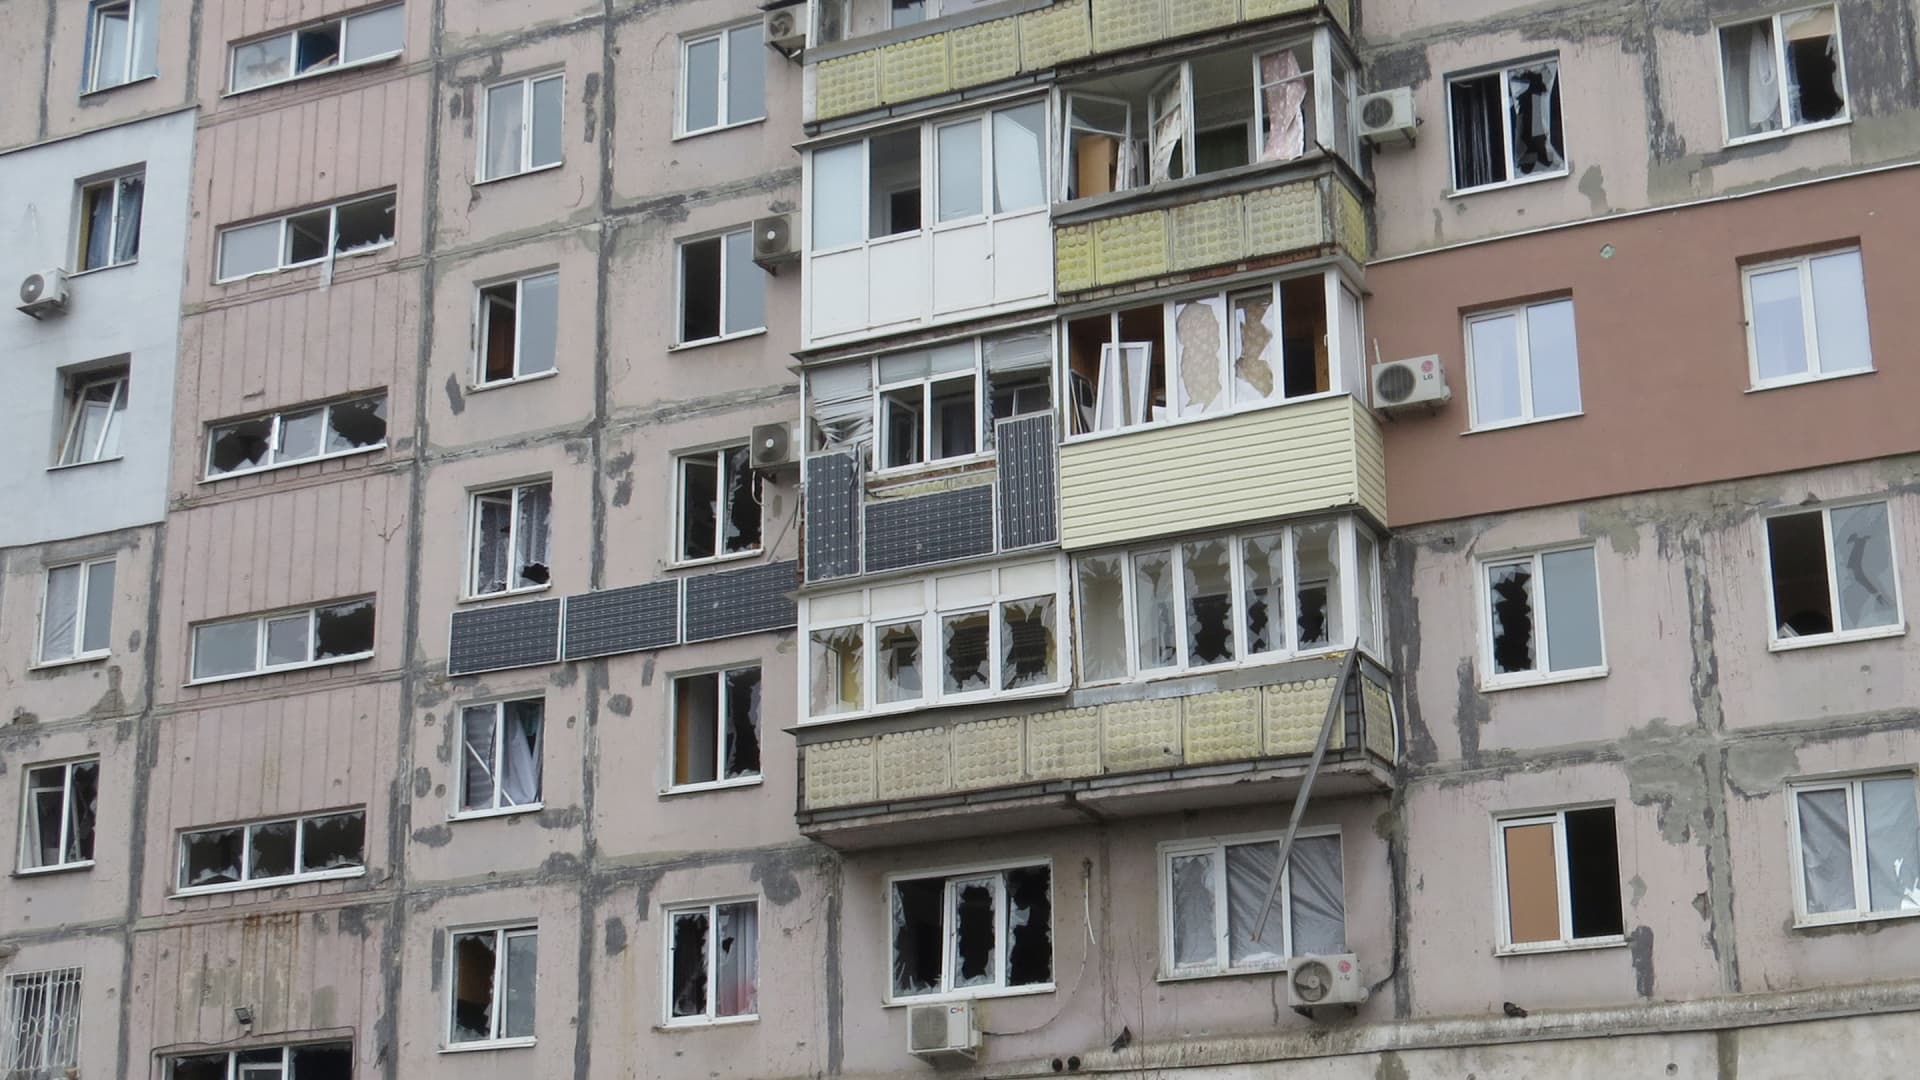 A view shows a residential building, which locals said was damaged by recent shelling, in Mariupol, Ukraine February 26, 2022.